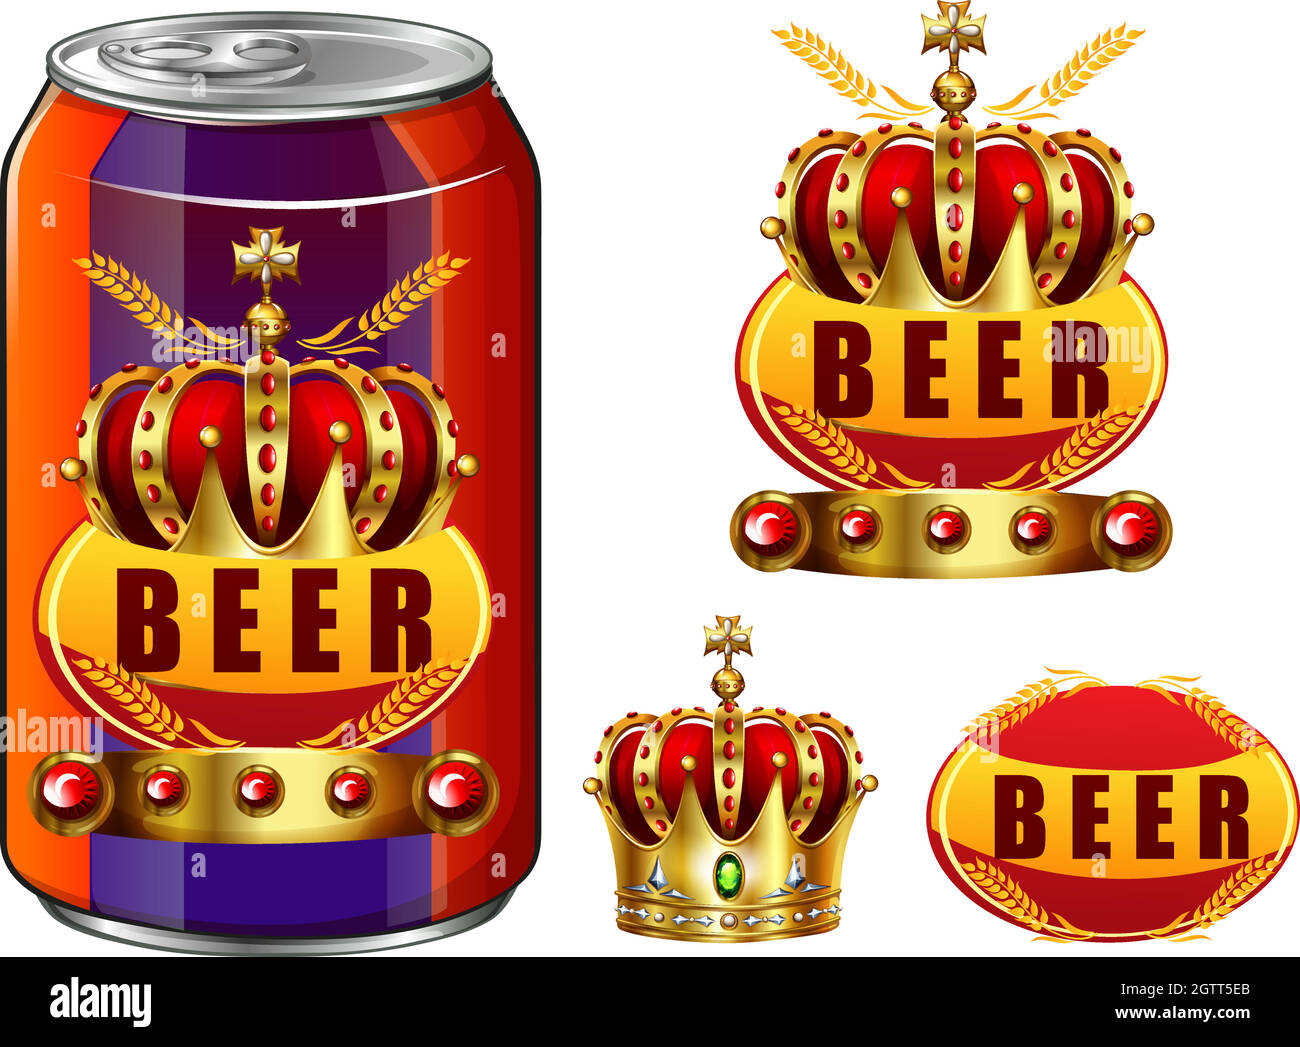 Beer in can and logo design Stock Vector